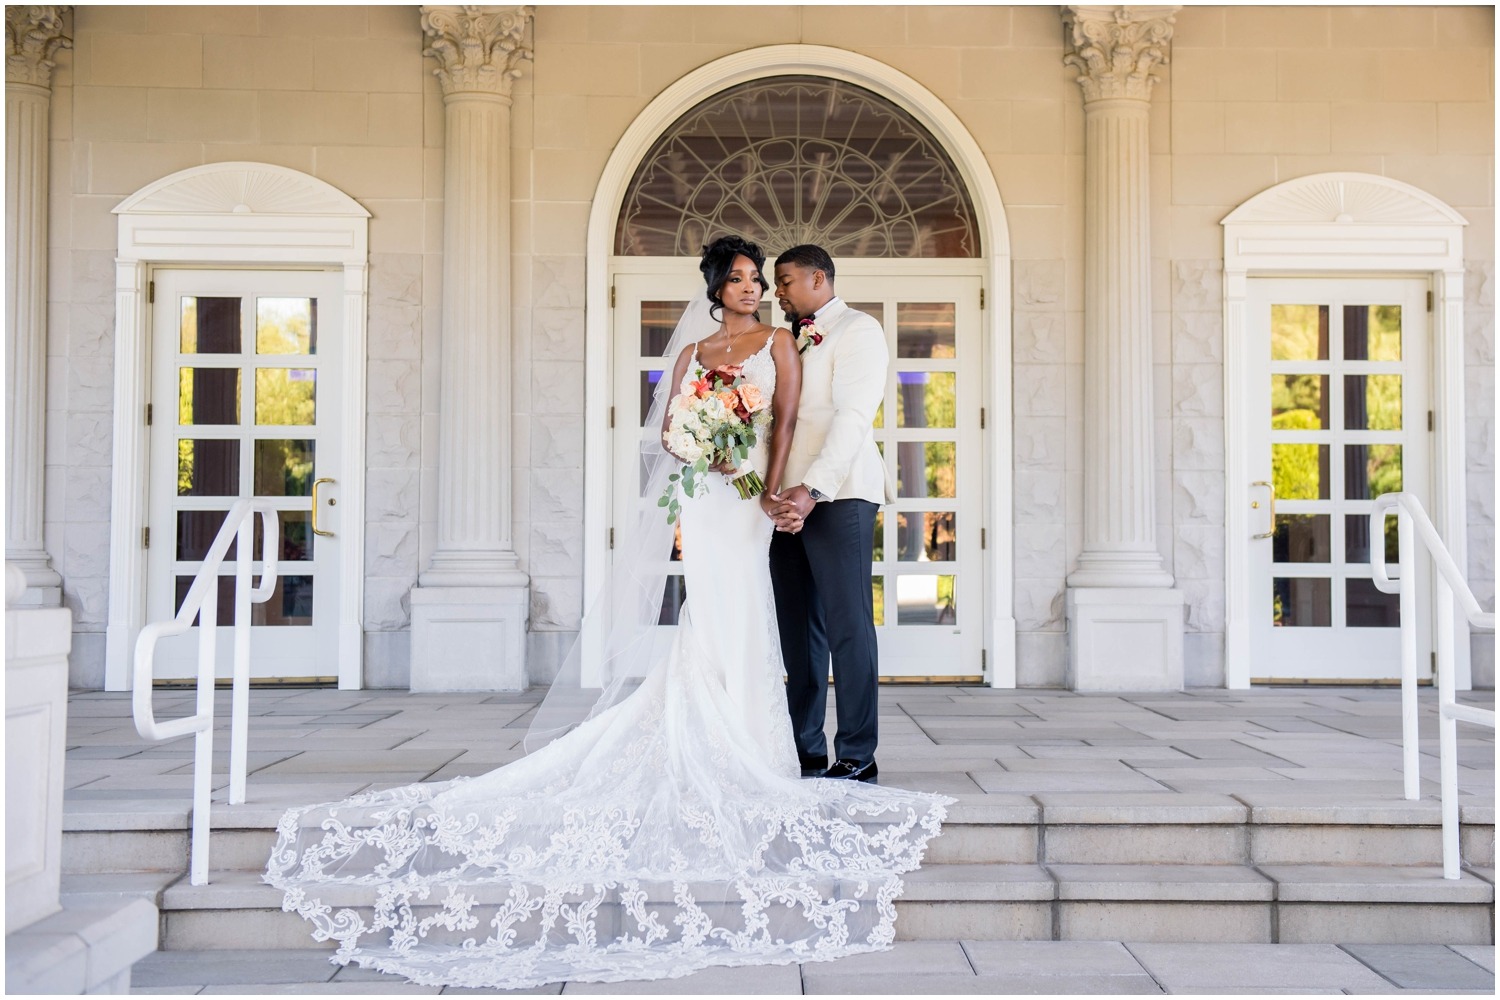 Bright and Colorful New Jersey Wedding Day | Indira + Nick